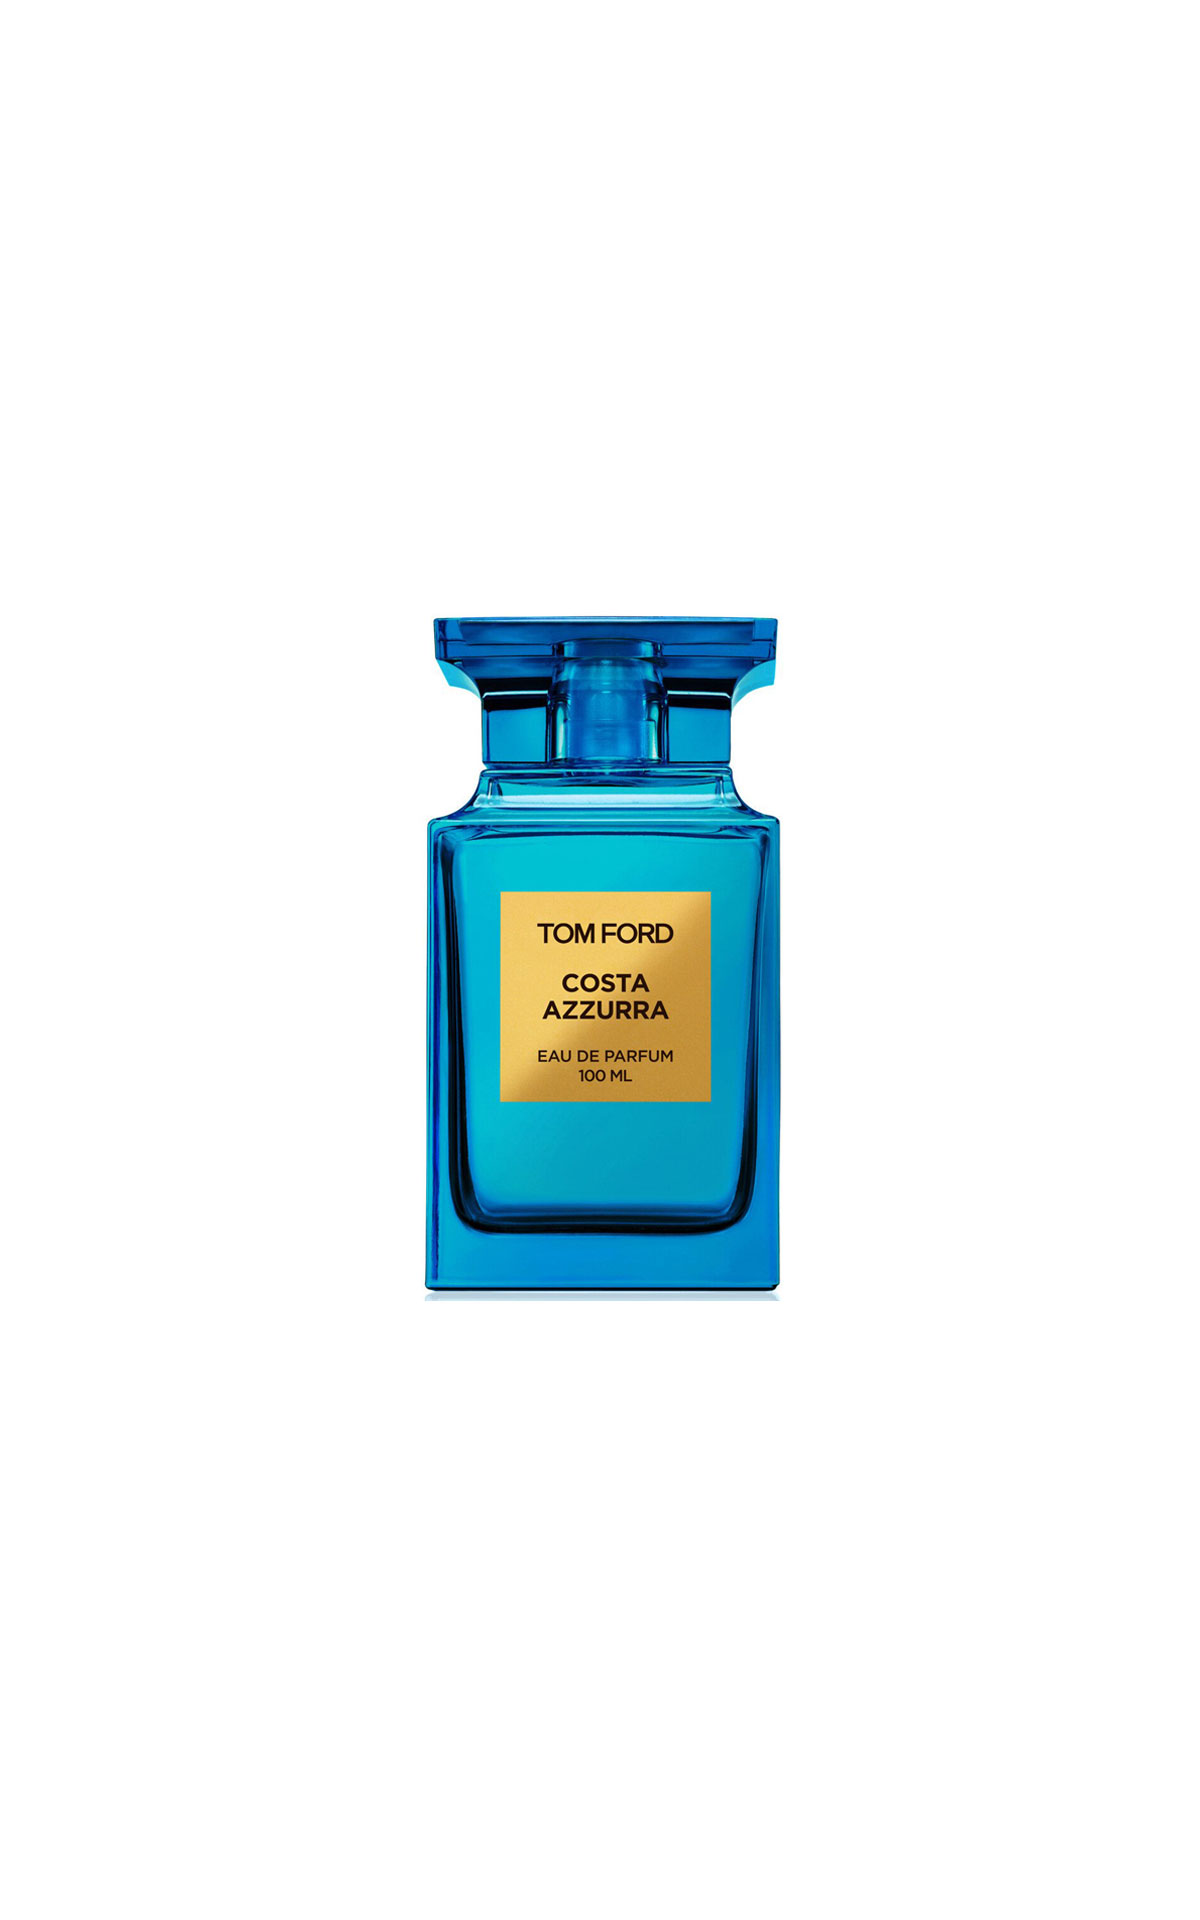 The Cosmetics Company Store Tom Ford Costa Azzurra EDP from Bicester Village